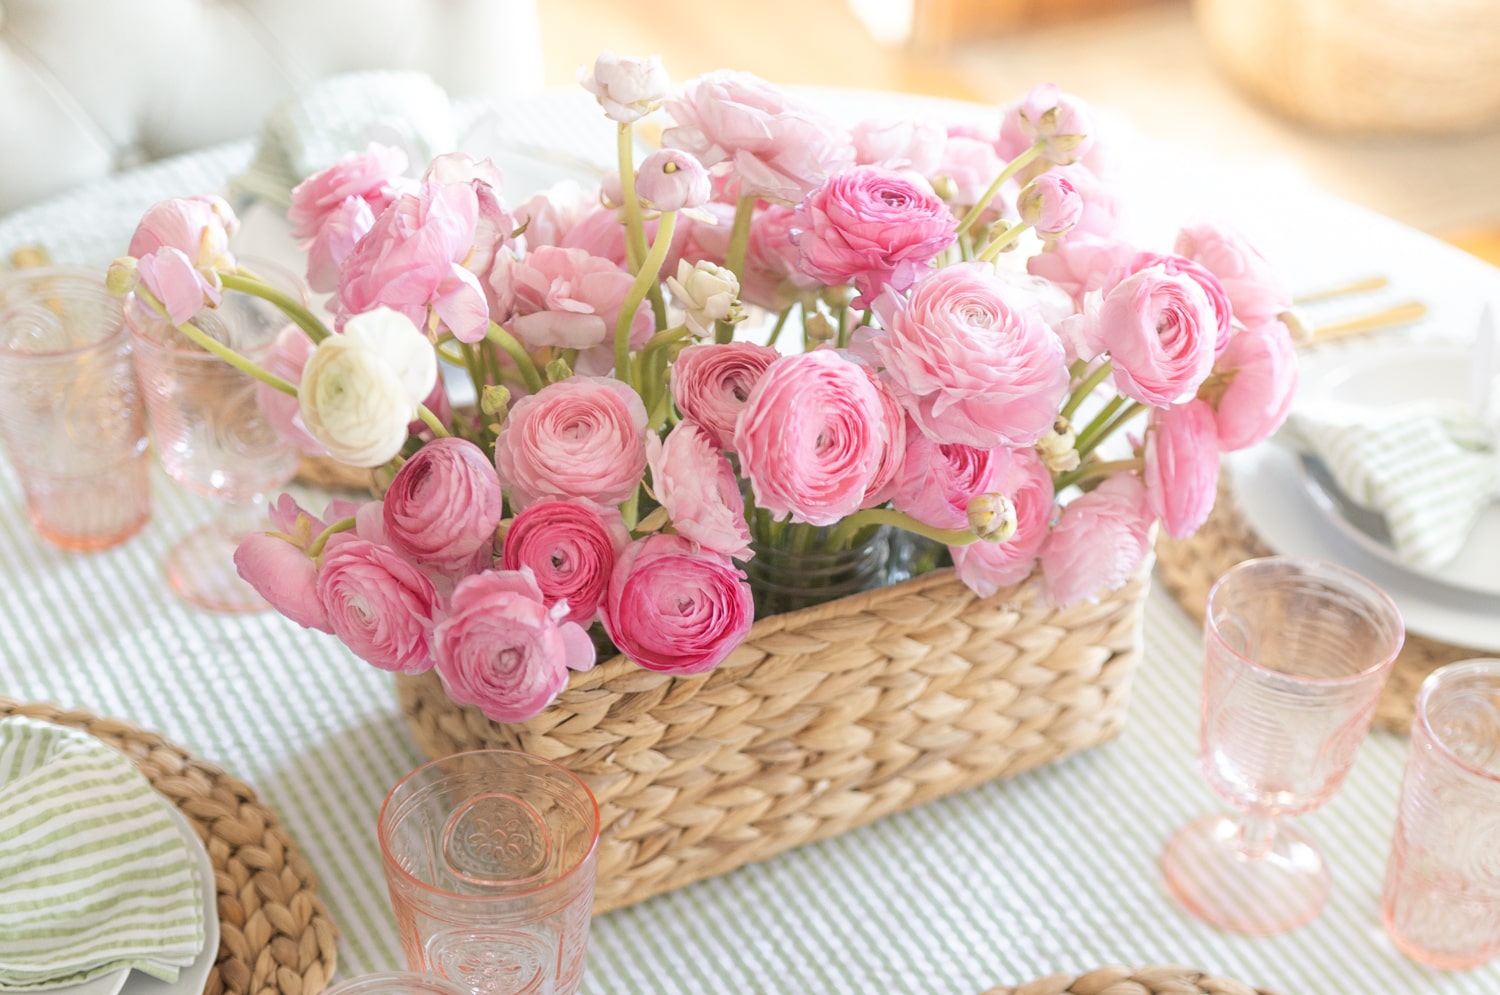 Pink centerpiece created by blogger Stephanie Ziajka on Diary of a Debutante